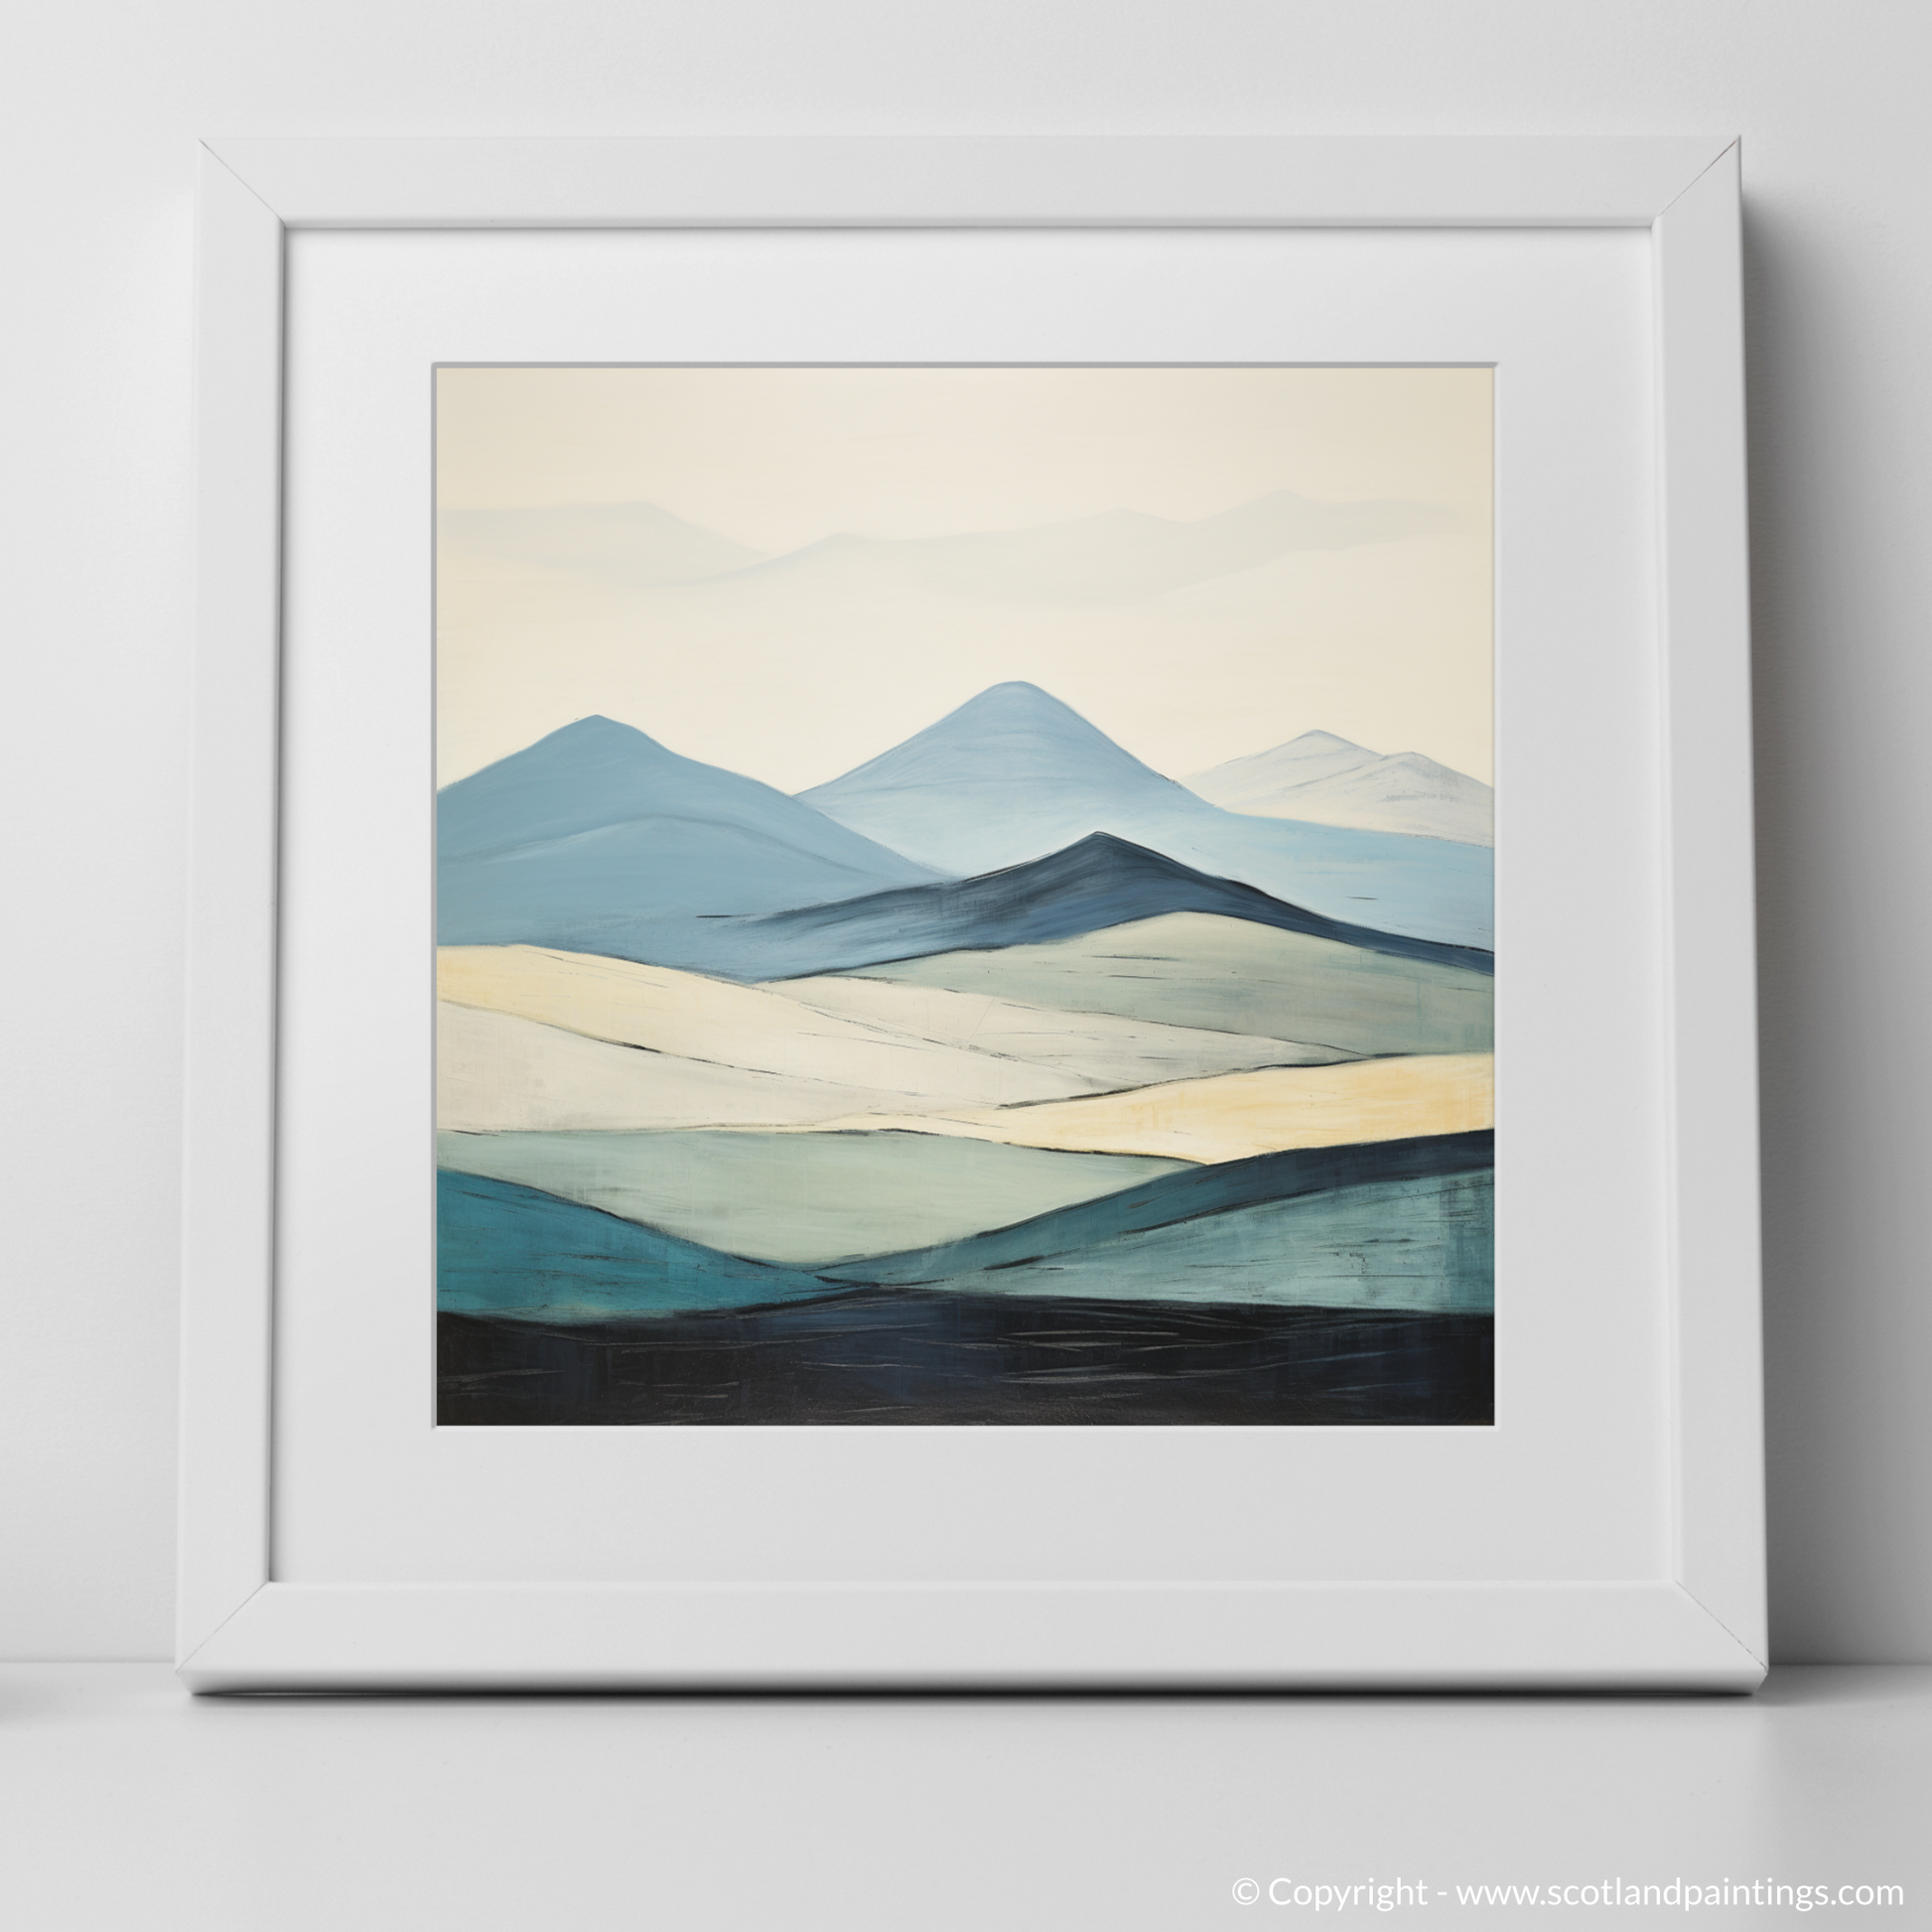 Art Print of Meall Corranaich with a white frame